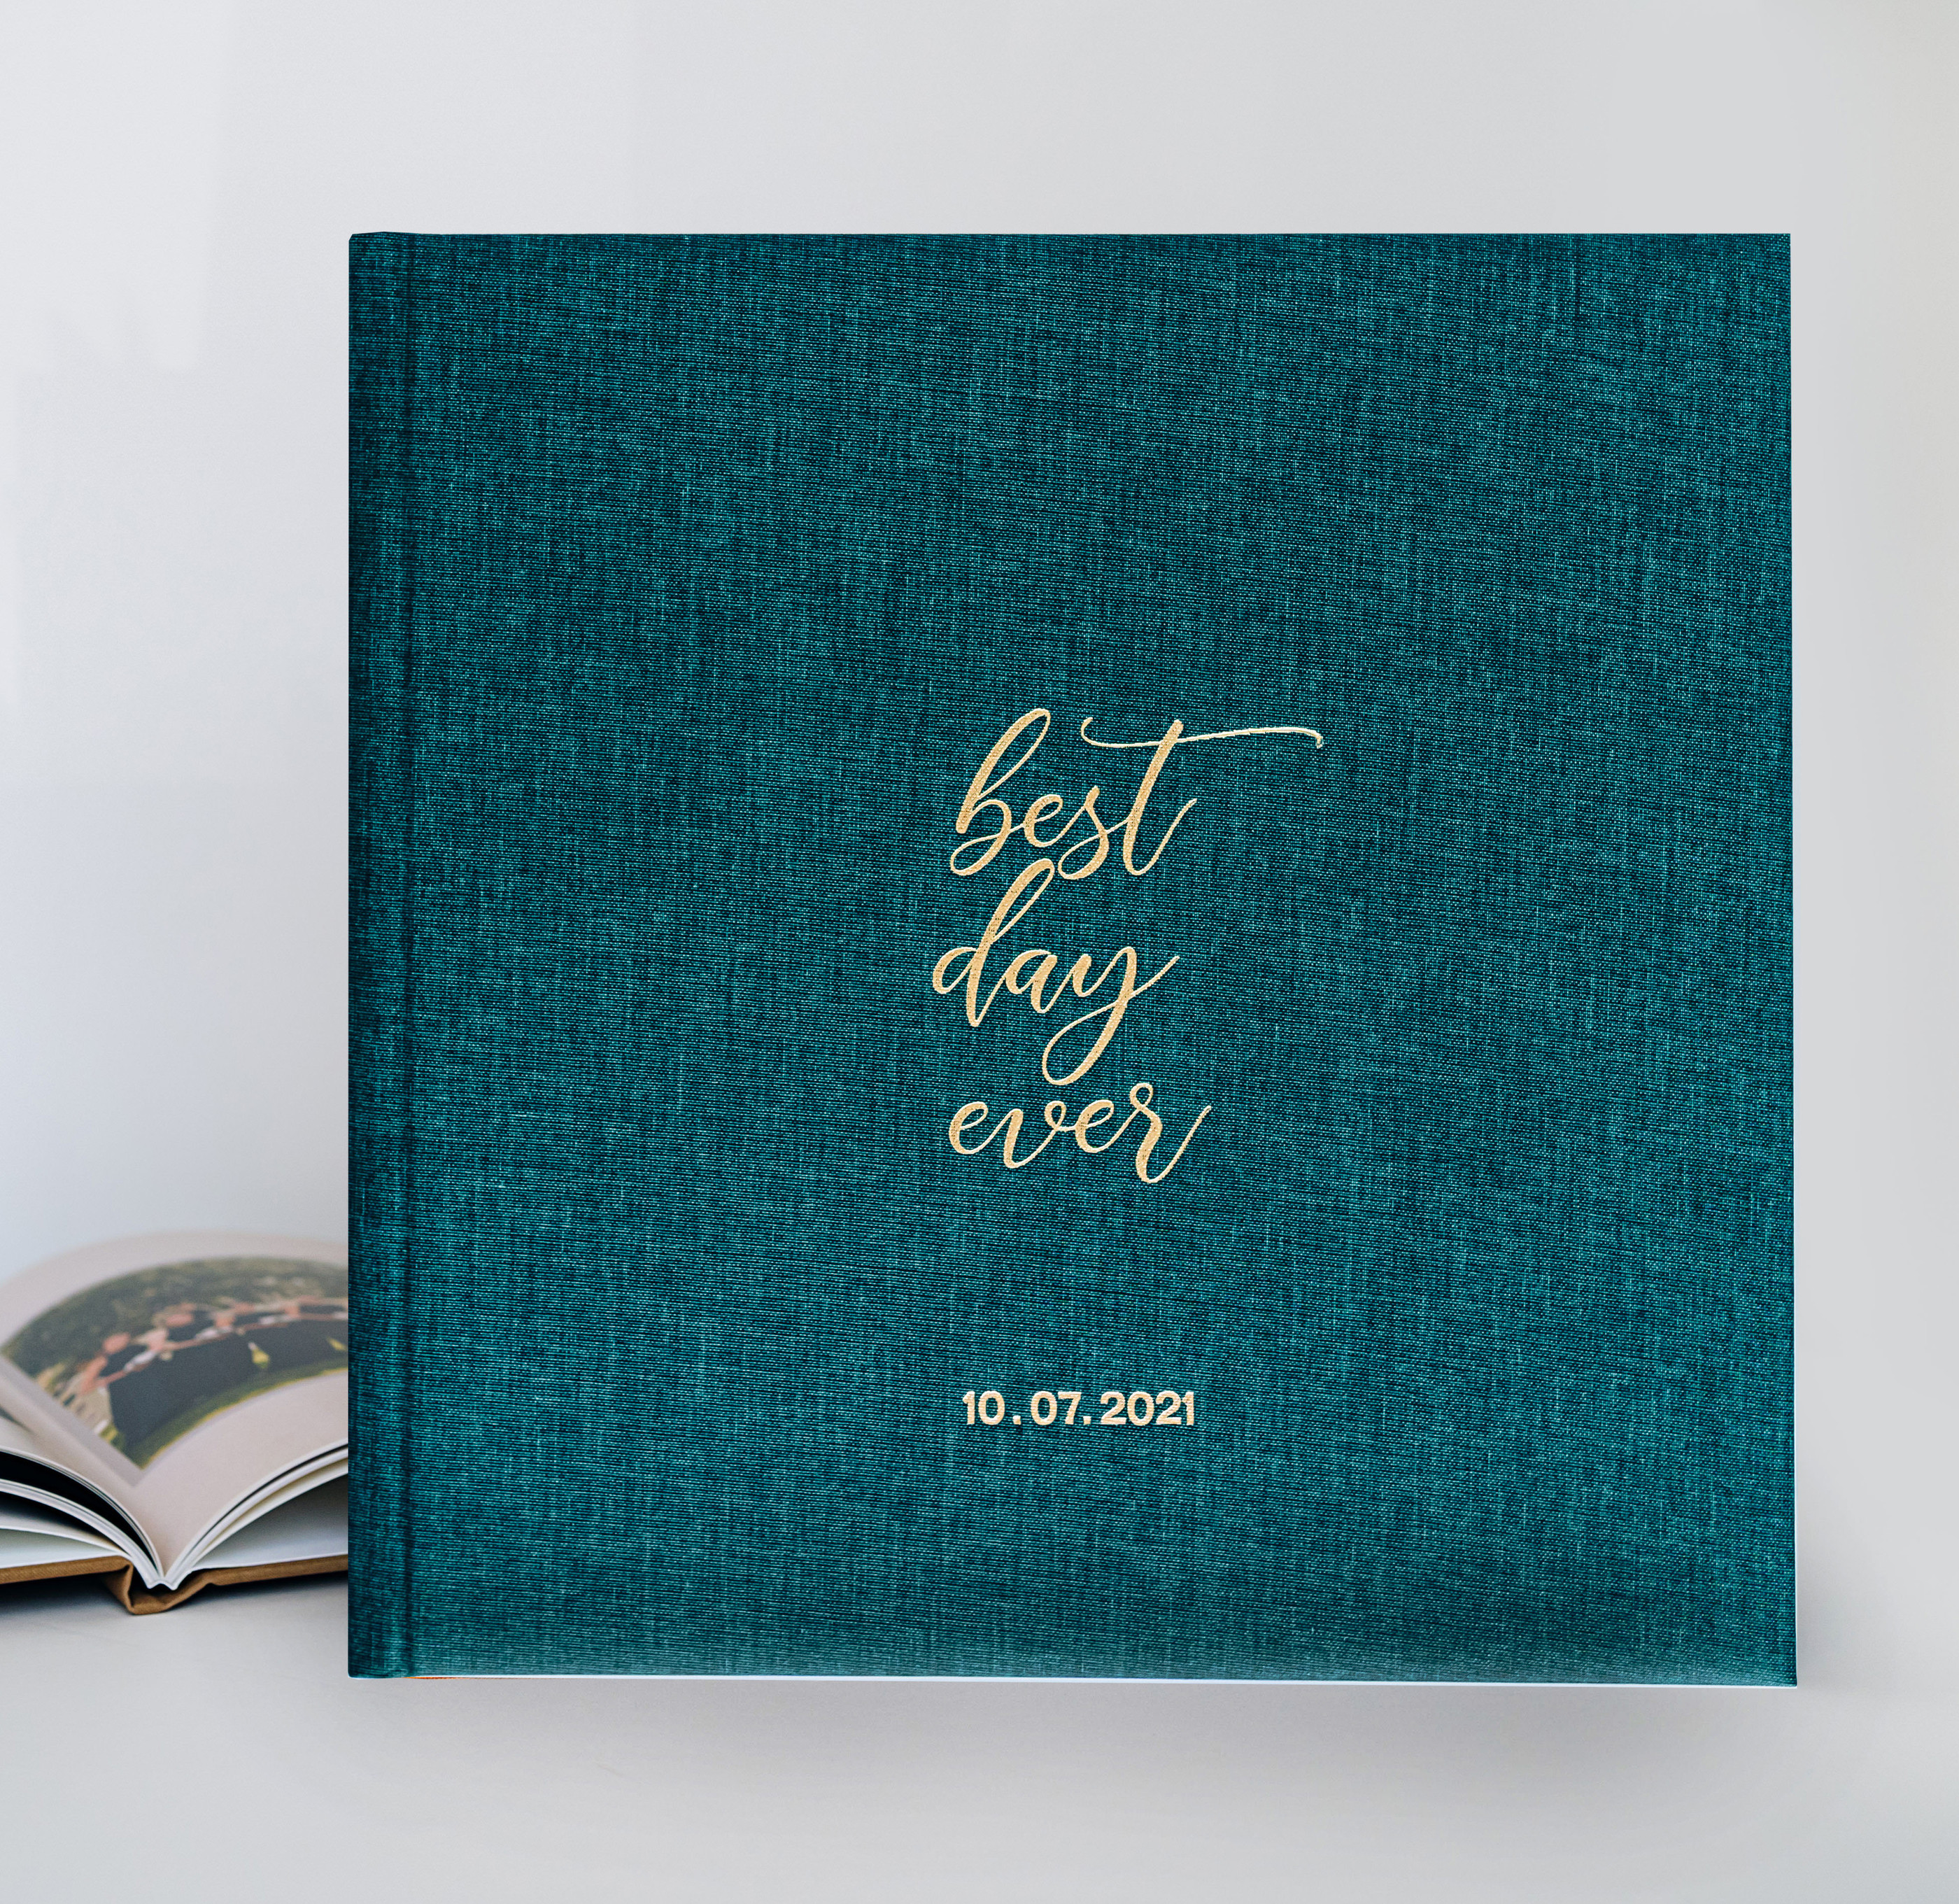 Wedding photo book with green linen cover and gold debossed title